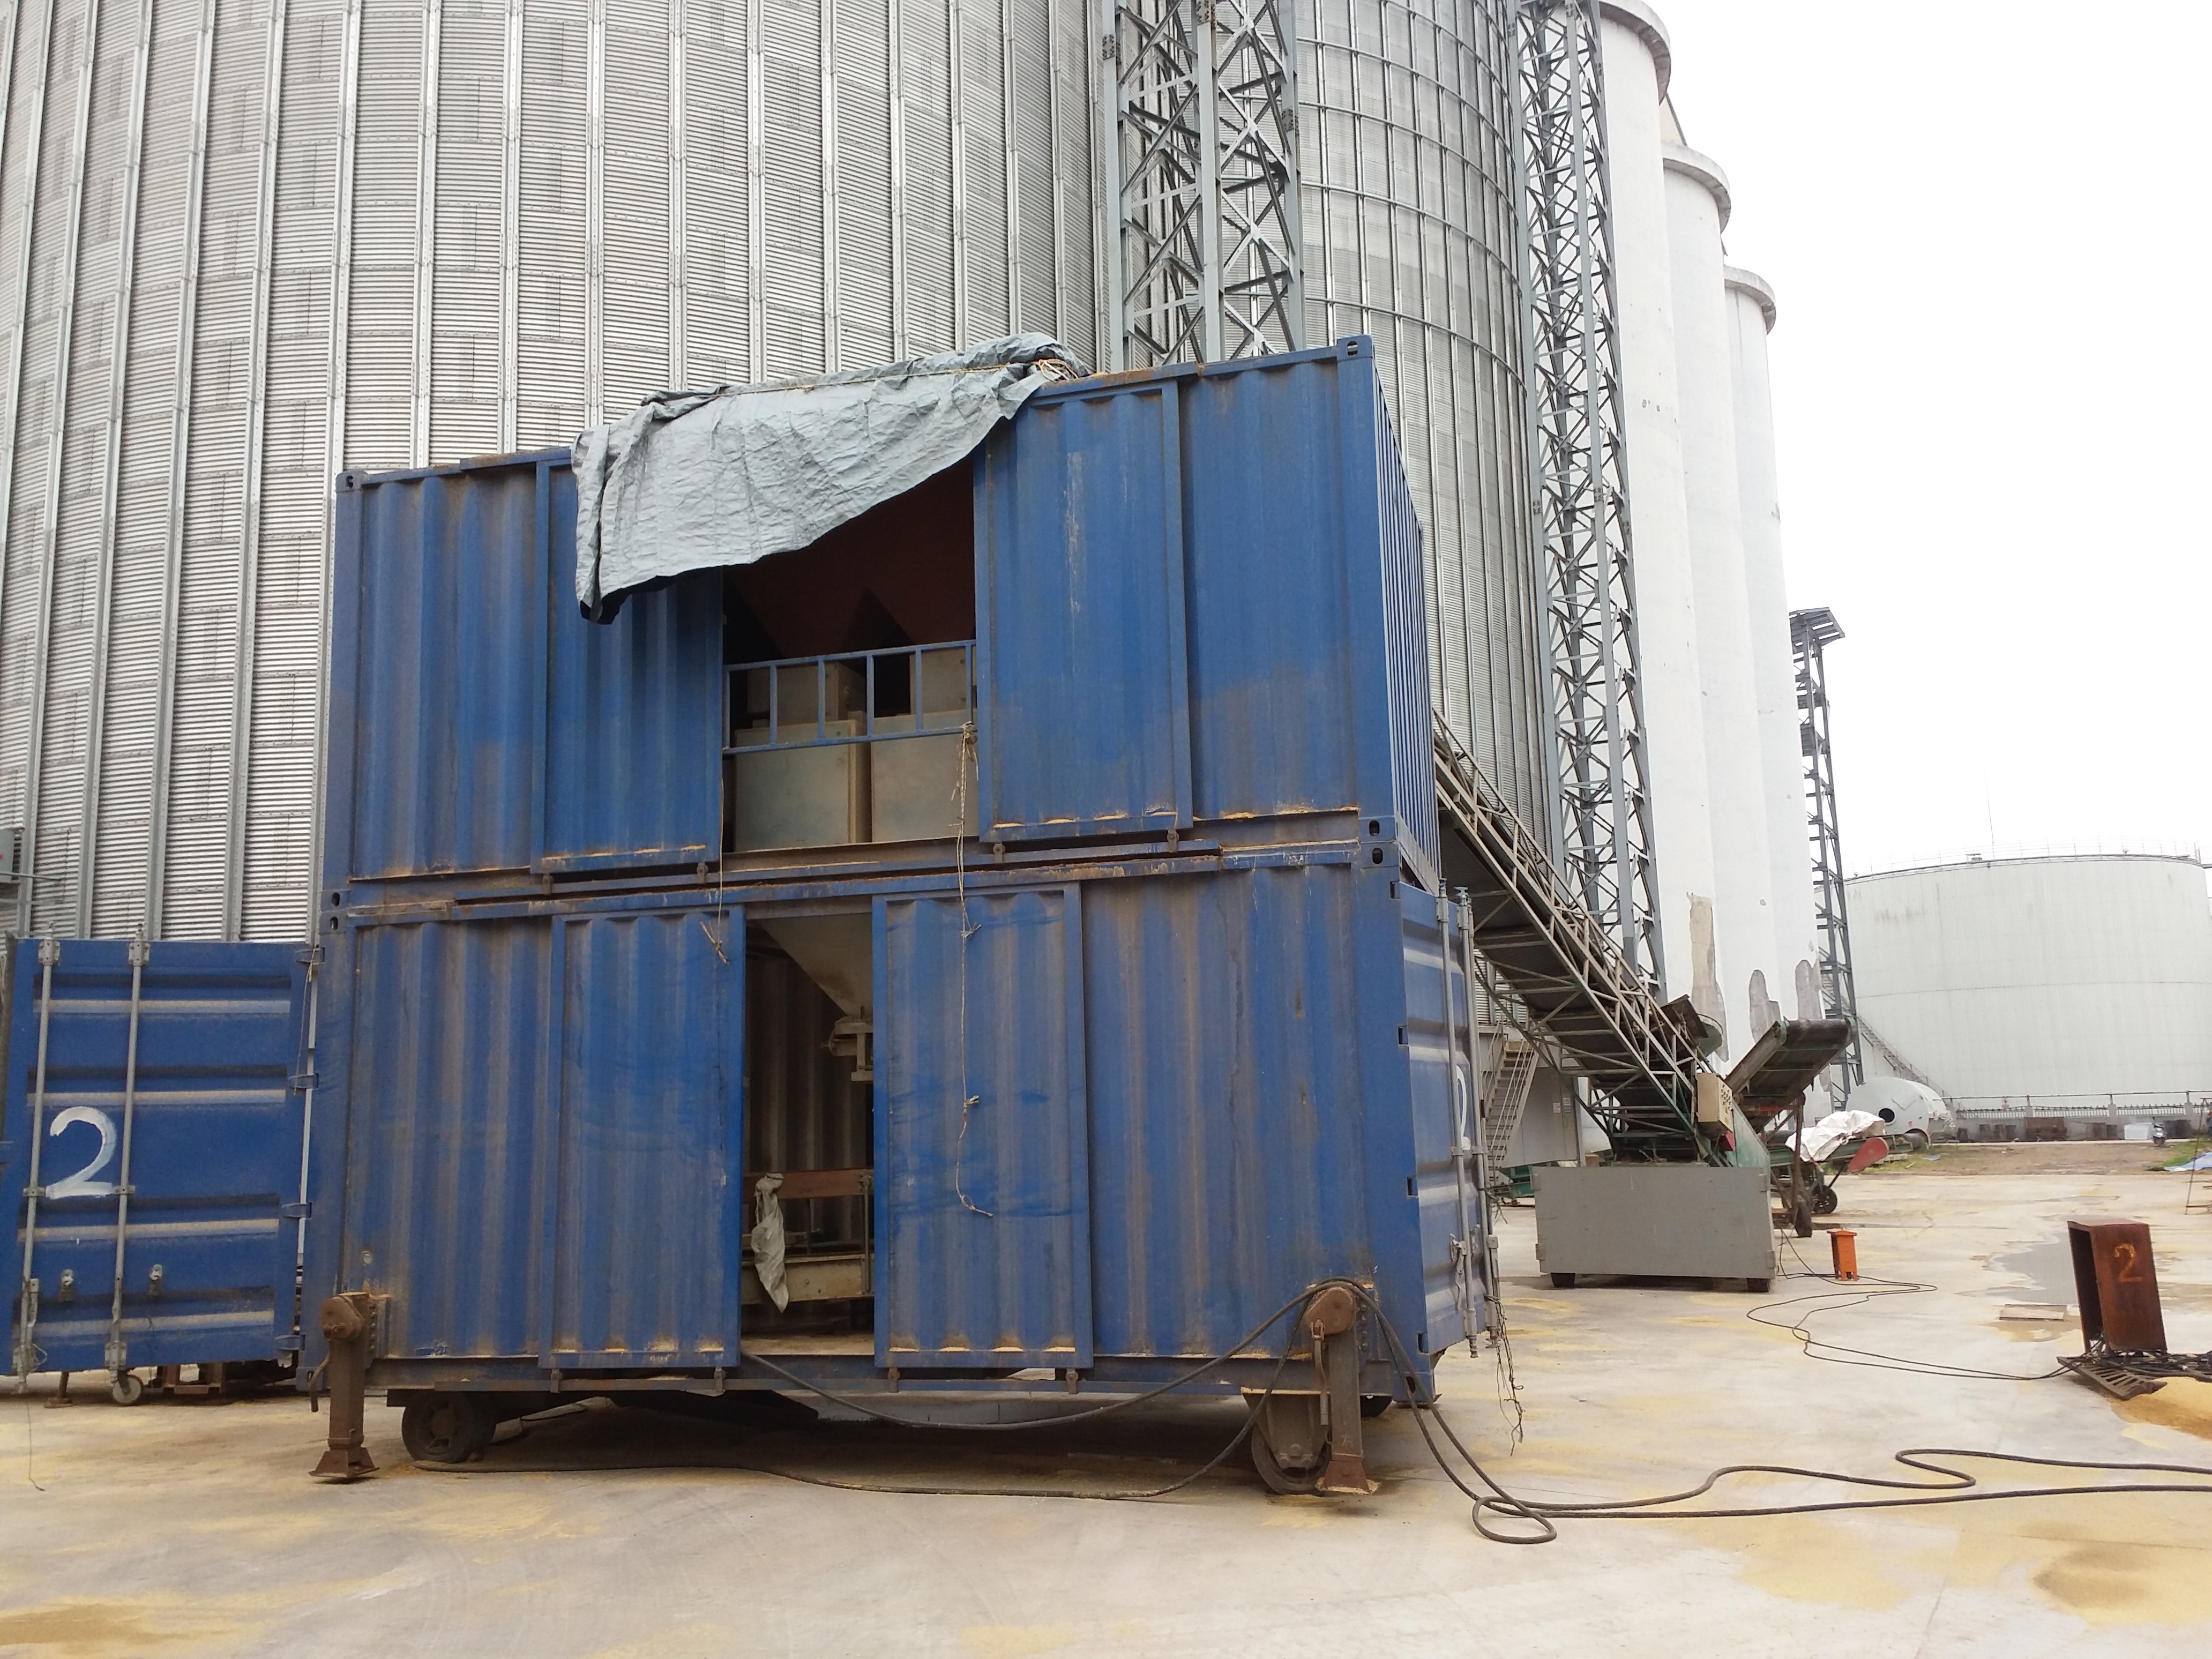 MOBILE BAGGING MACHINES containerized bagging system Containerised bagging system Mobile Bagging Unit MOBILE BAGGING MACHINES for Grains, pulses, iodised salts, sugar